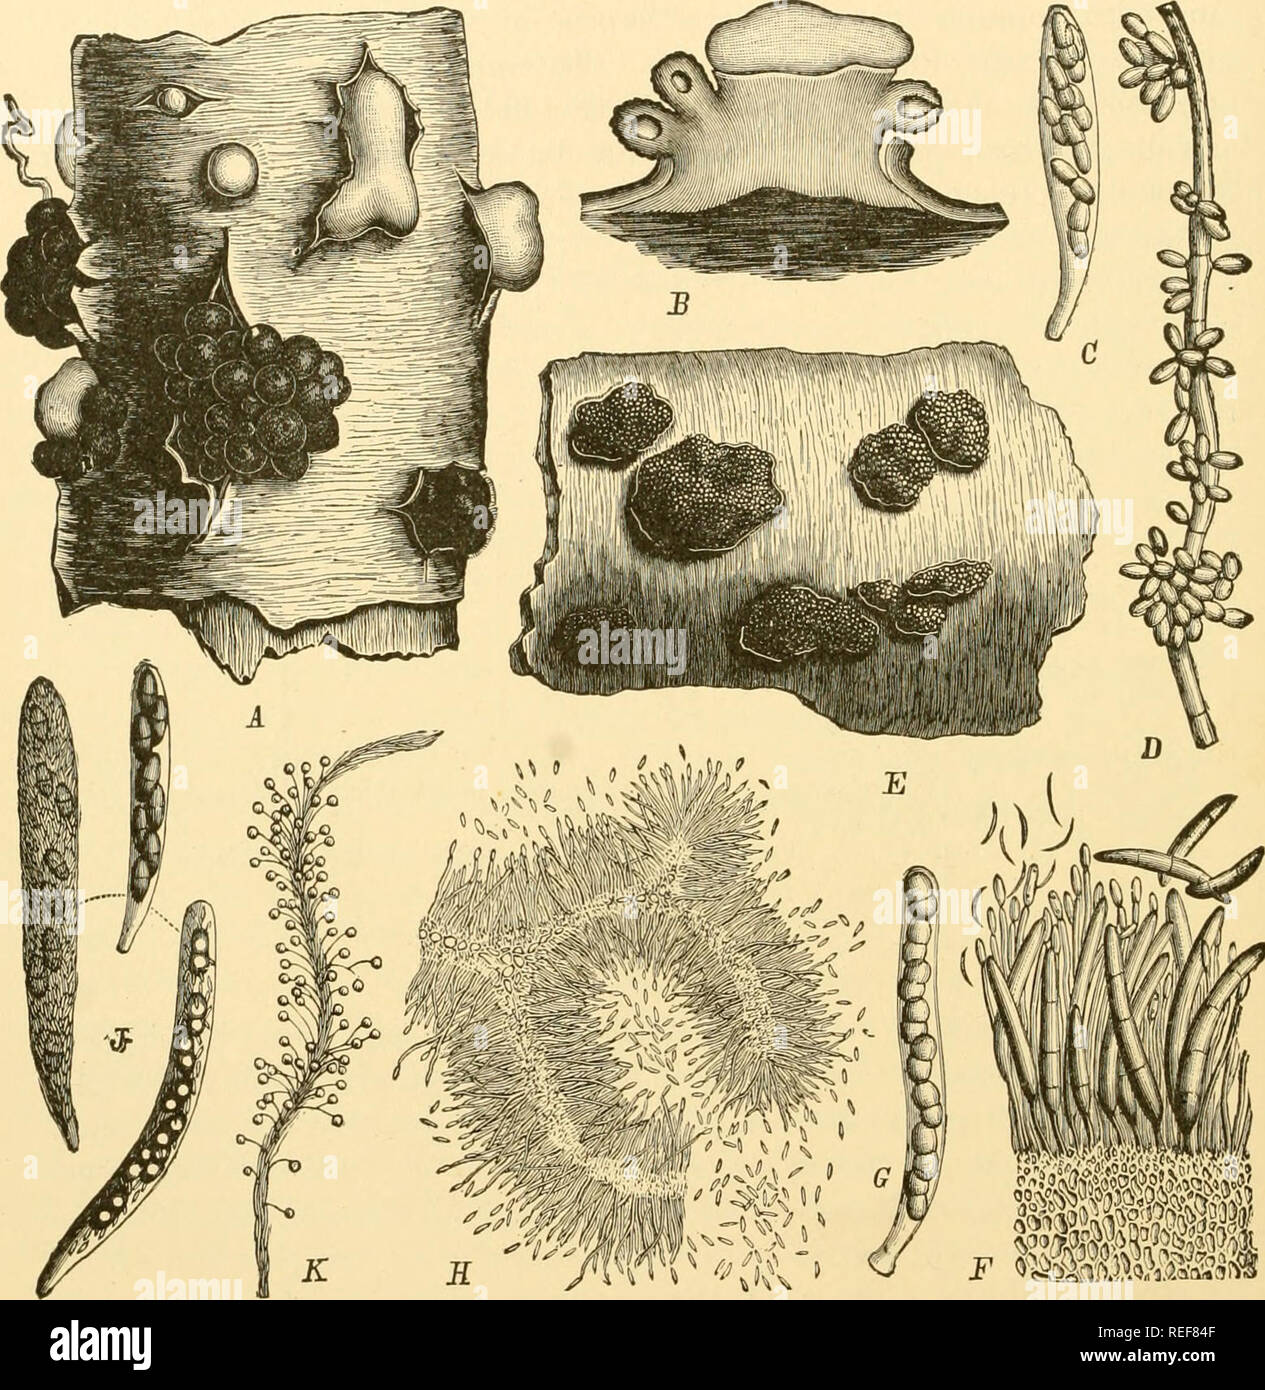 . Comparative morphology of Fungi. Fungi. 234 COMPARATIVE MORPHOLOGY OF FUNGI Gemmae and conidia are known as imperfect forms. The gemmae are mostly hyaline or brownish and occasionally verrucose; they develop (especially in drying cultures) on hyphae, singly or catenulately, and. Fig. 150.—Nectria cinnabarina. A. Conidial stromata (shown light) perithecial stromata (dark) erumpent from bark of host, B. Section through a stroma which is still cutting off conidia at the top while it has formed perithecia on the sides. C. Ascus. D. Hypha with microconidia. Nectria ditissima. E. Perithecial layer Stock Photo